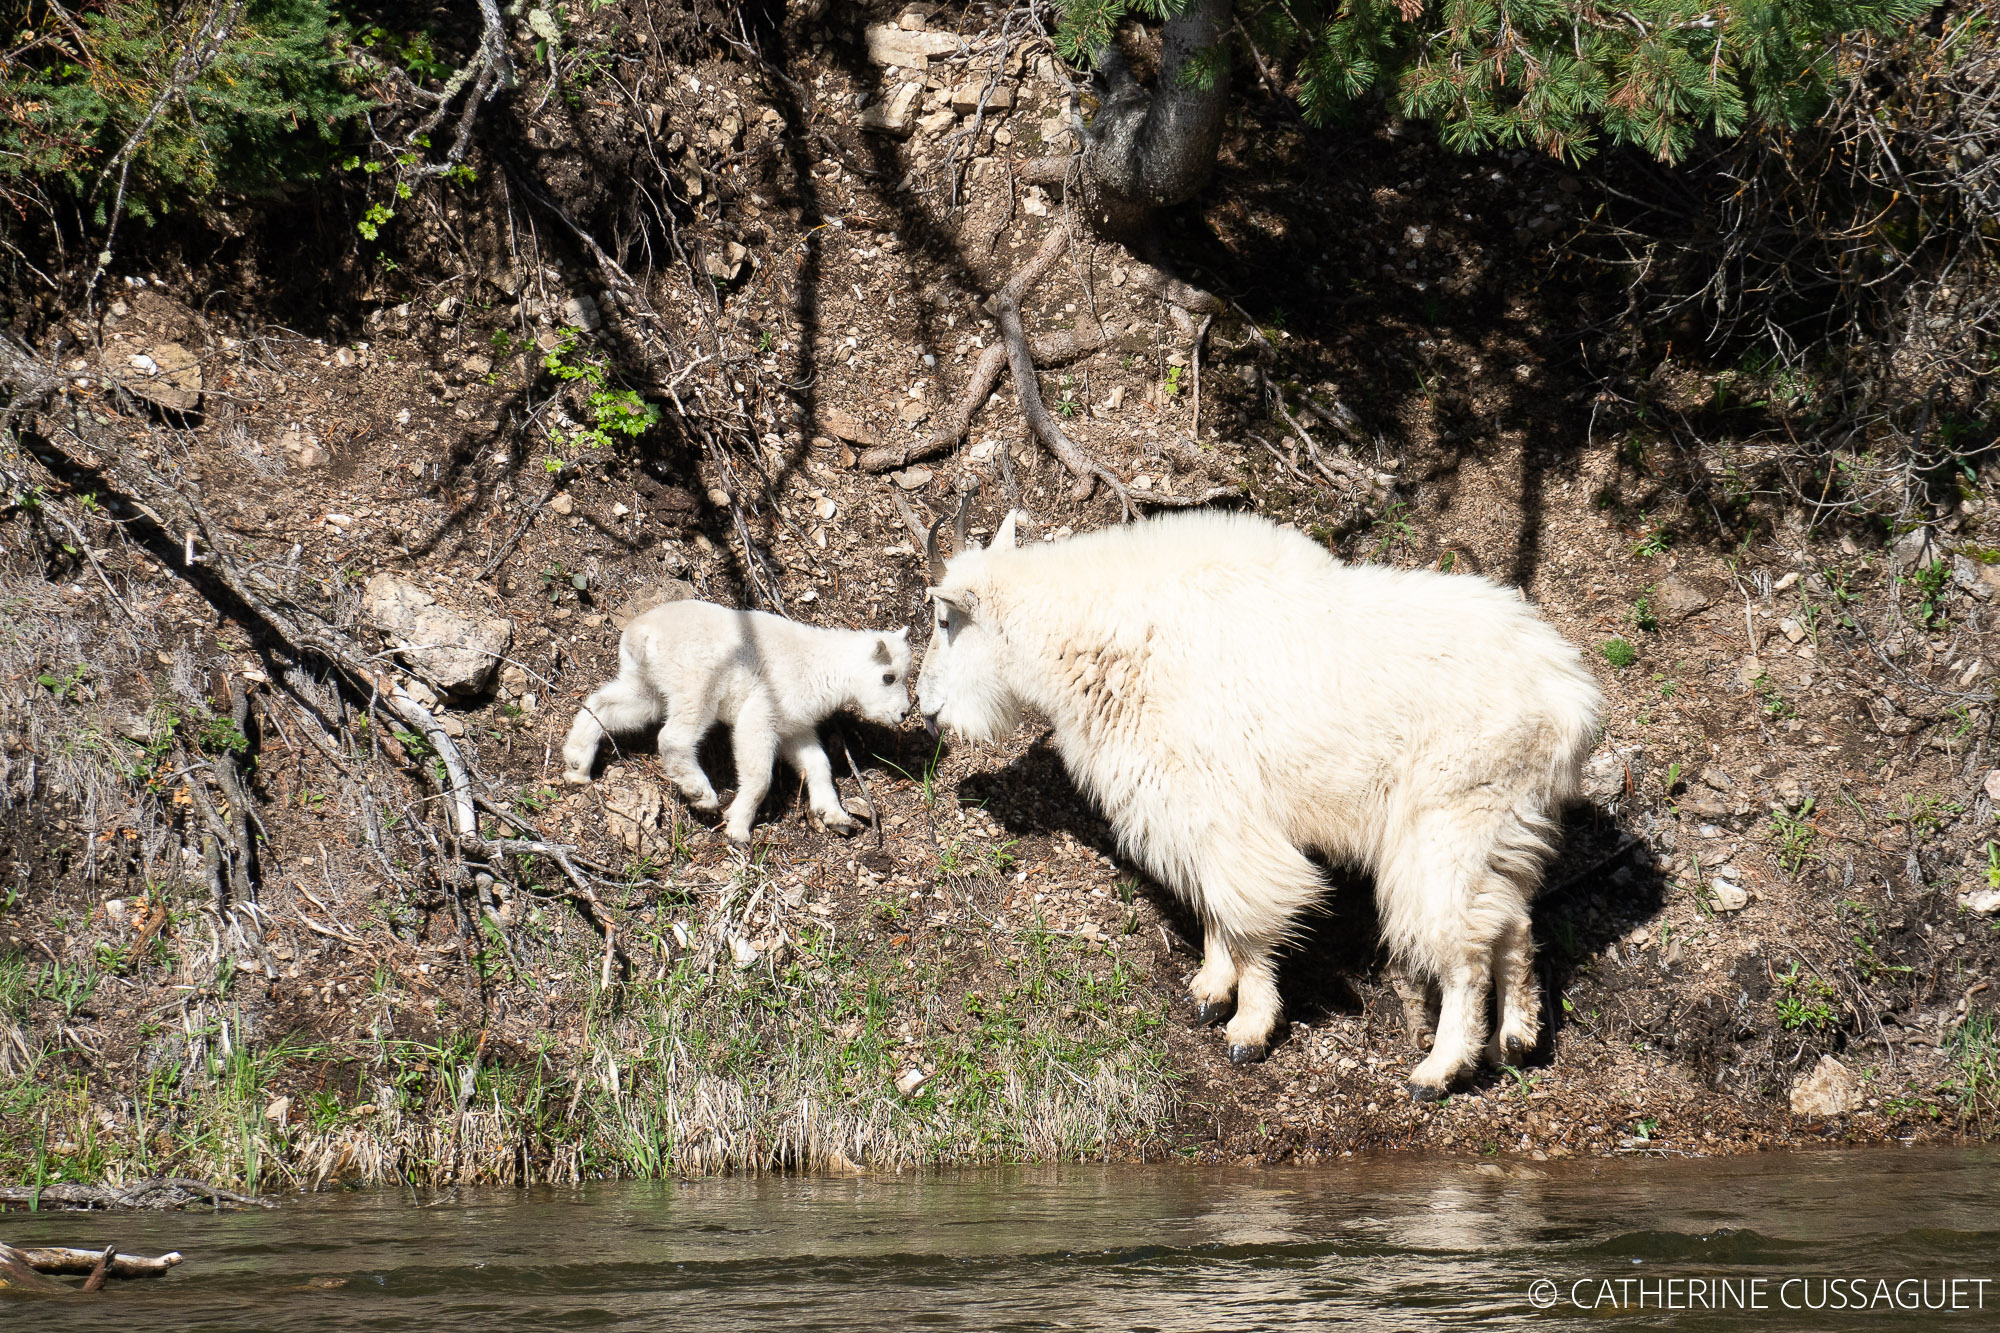 Mother and baby mountain goat